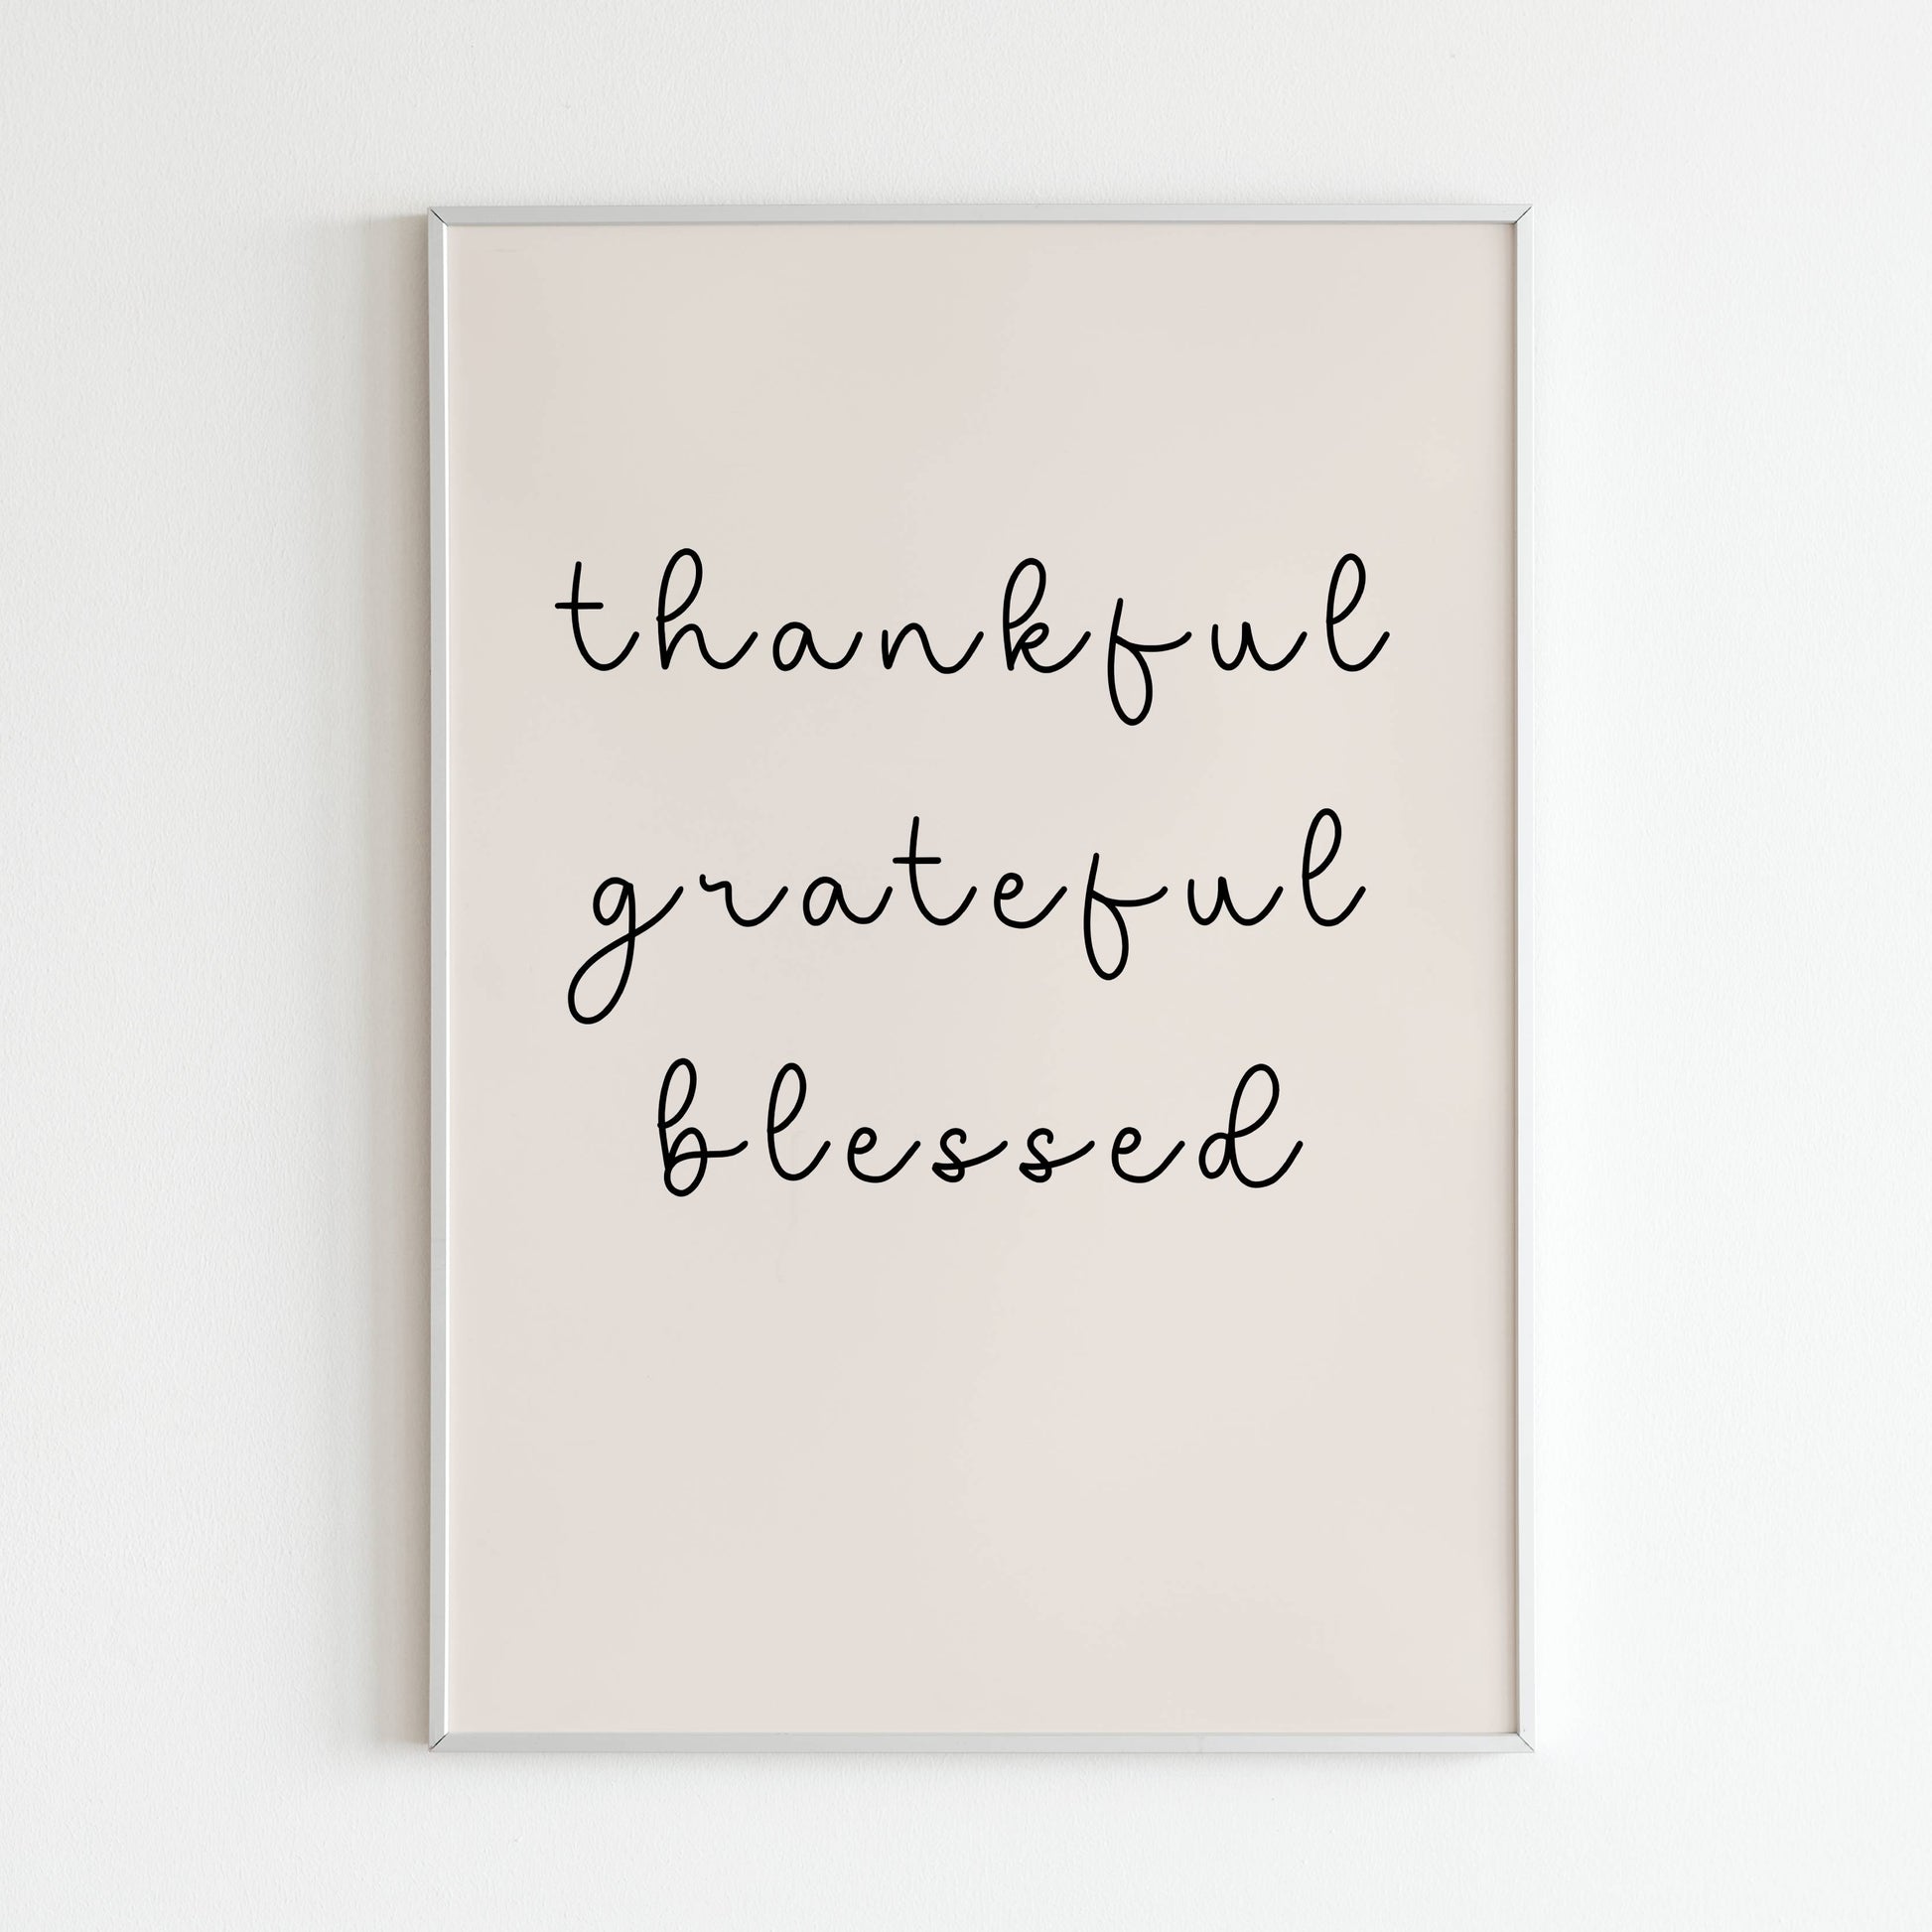 Downloadable "Thankful, Grateful, Blessed" art print, remind yourself and others to appreciate the good things in life.